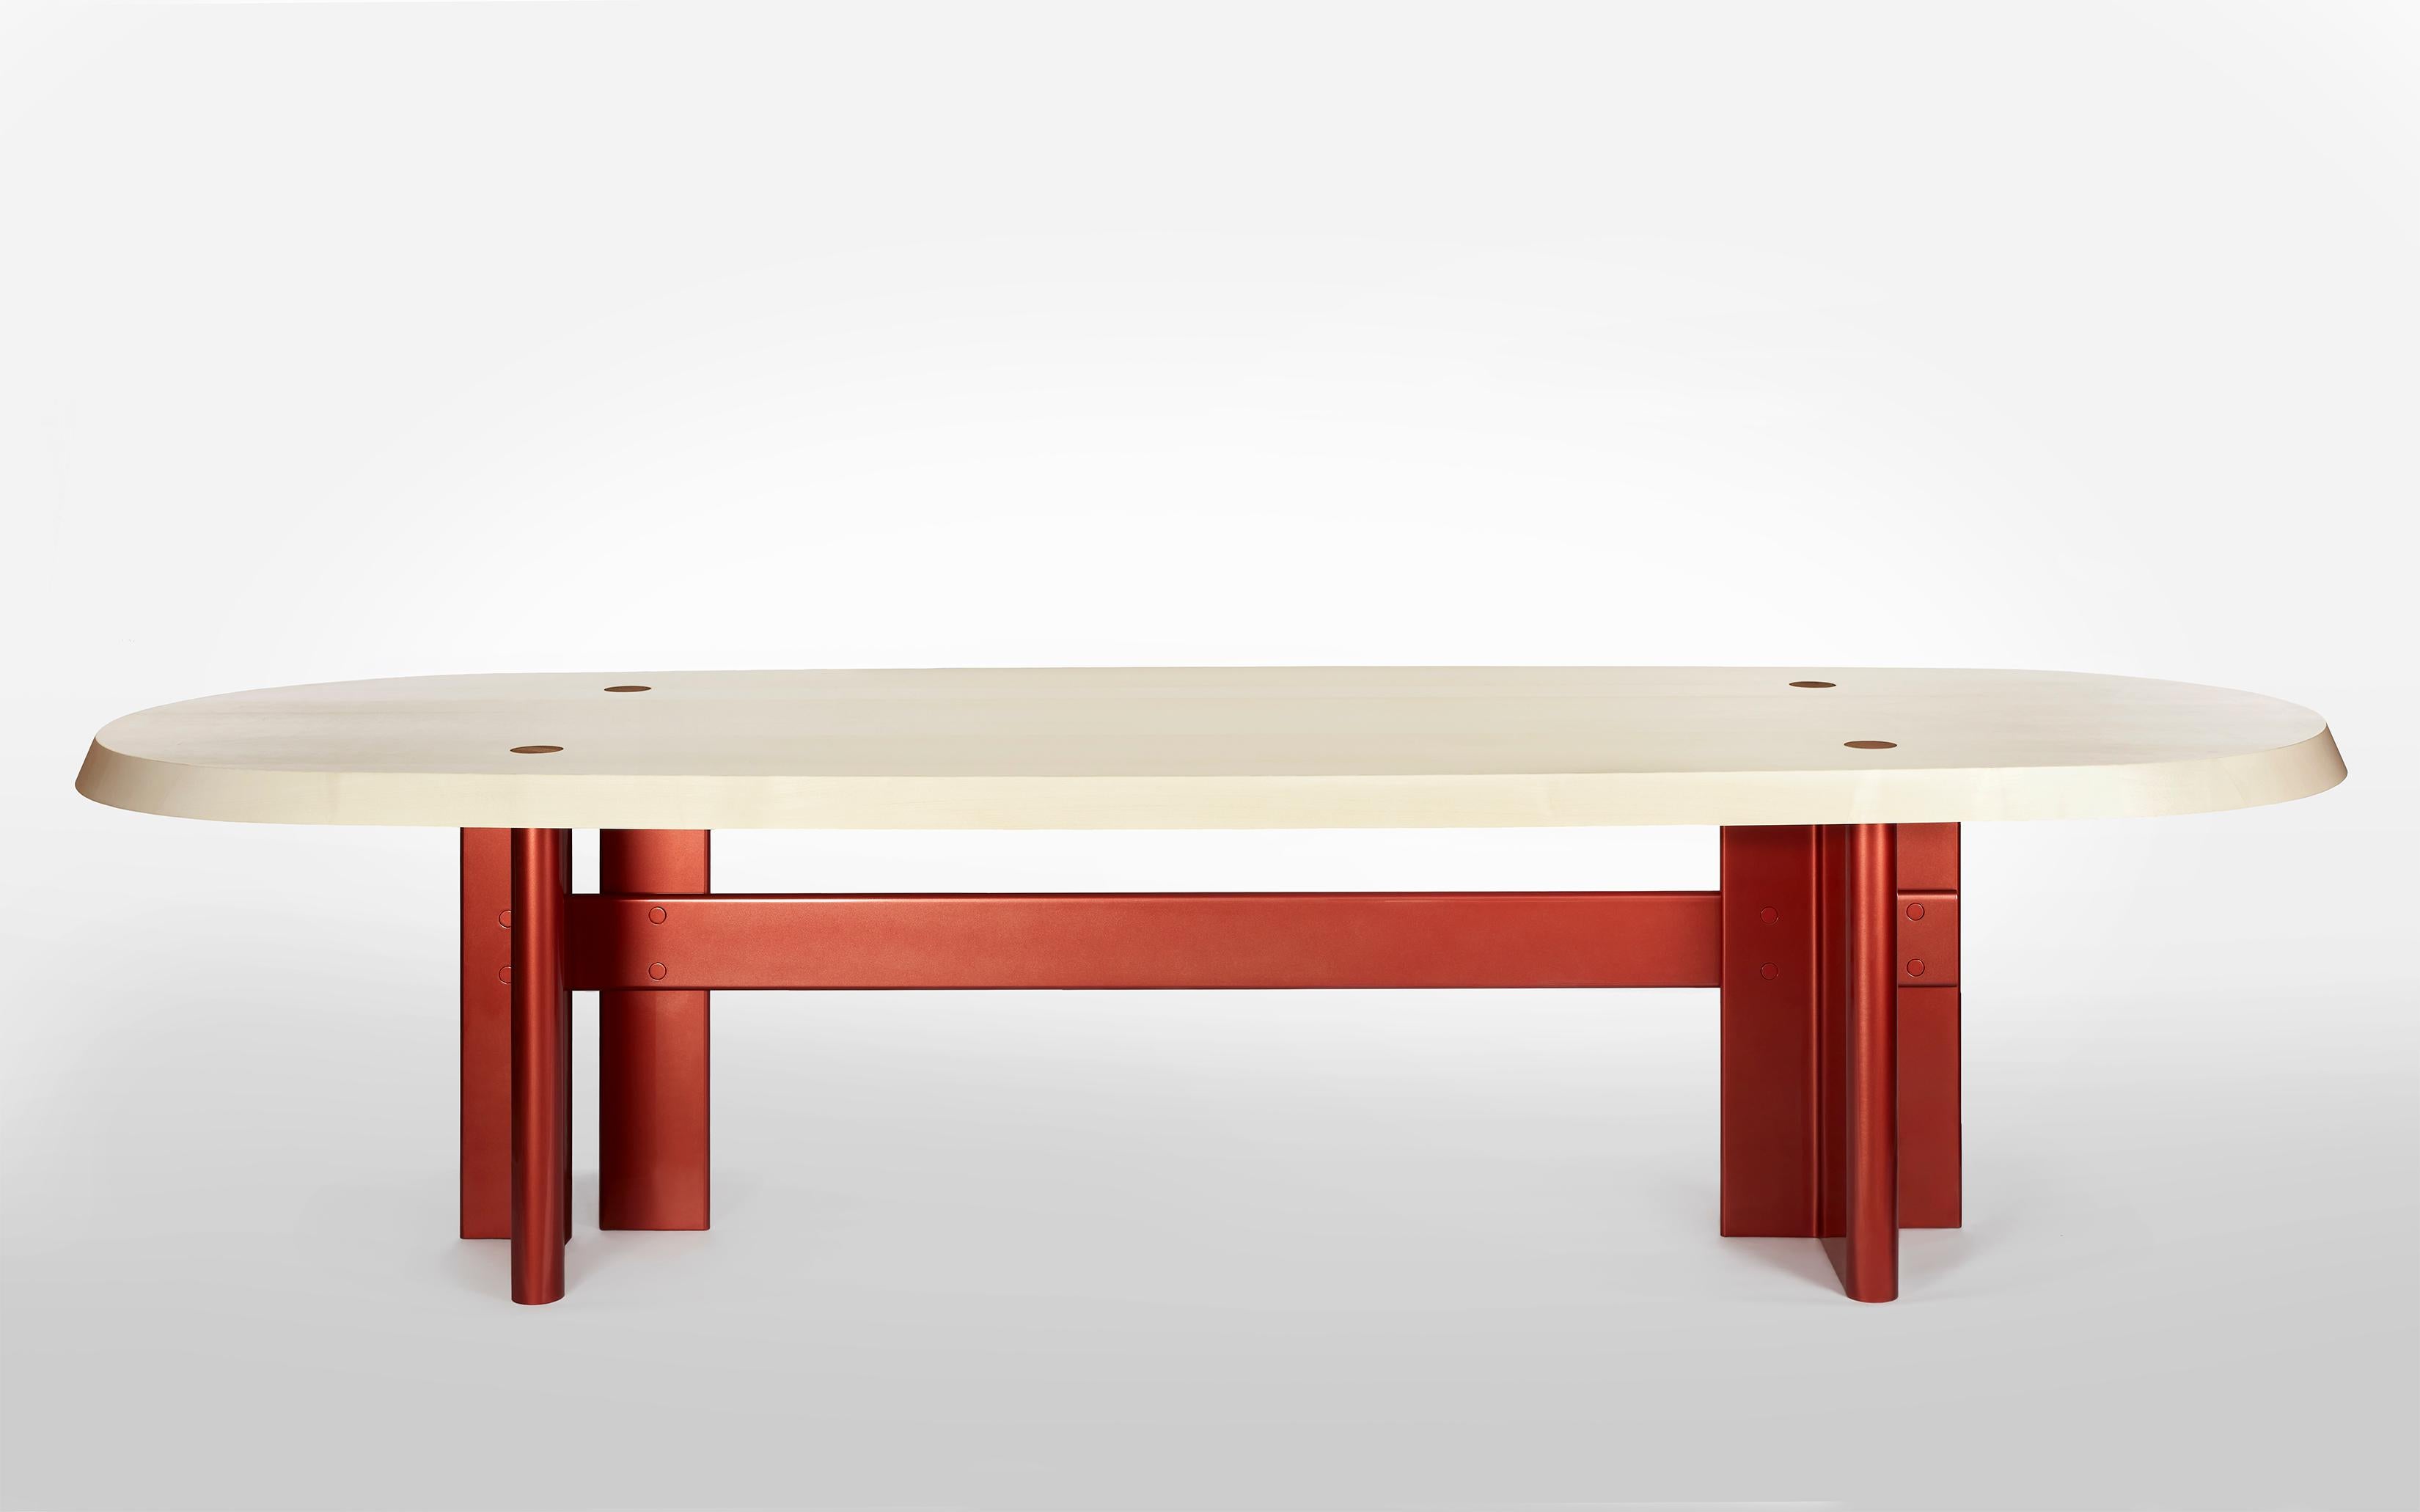 Kayak maple dining table by Gisbert Pöppler
Dimensions: D 320 x W 110 x H 75 cm
Materials: Maple wood, high gloss lacquered steel base

Perfectly balanced and sturdy like the sleek boat and hunter of the arctic, the Kayak dinner table is a